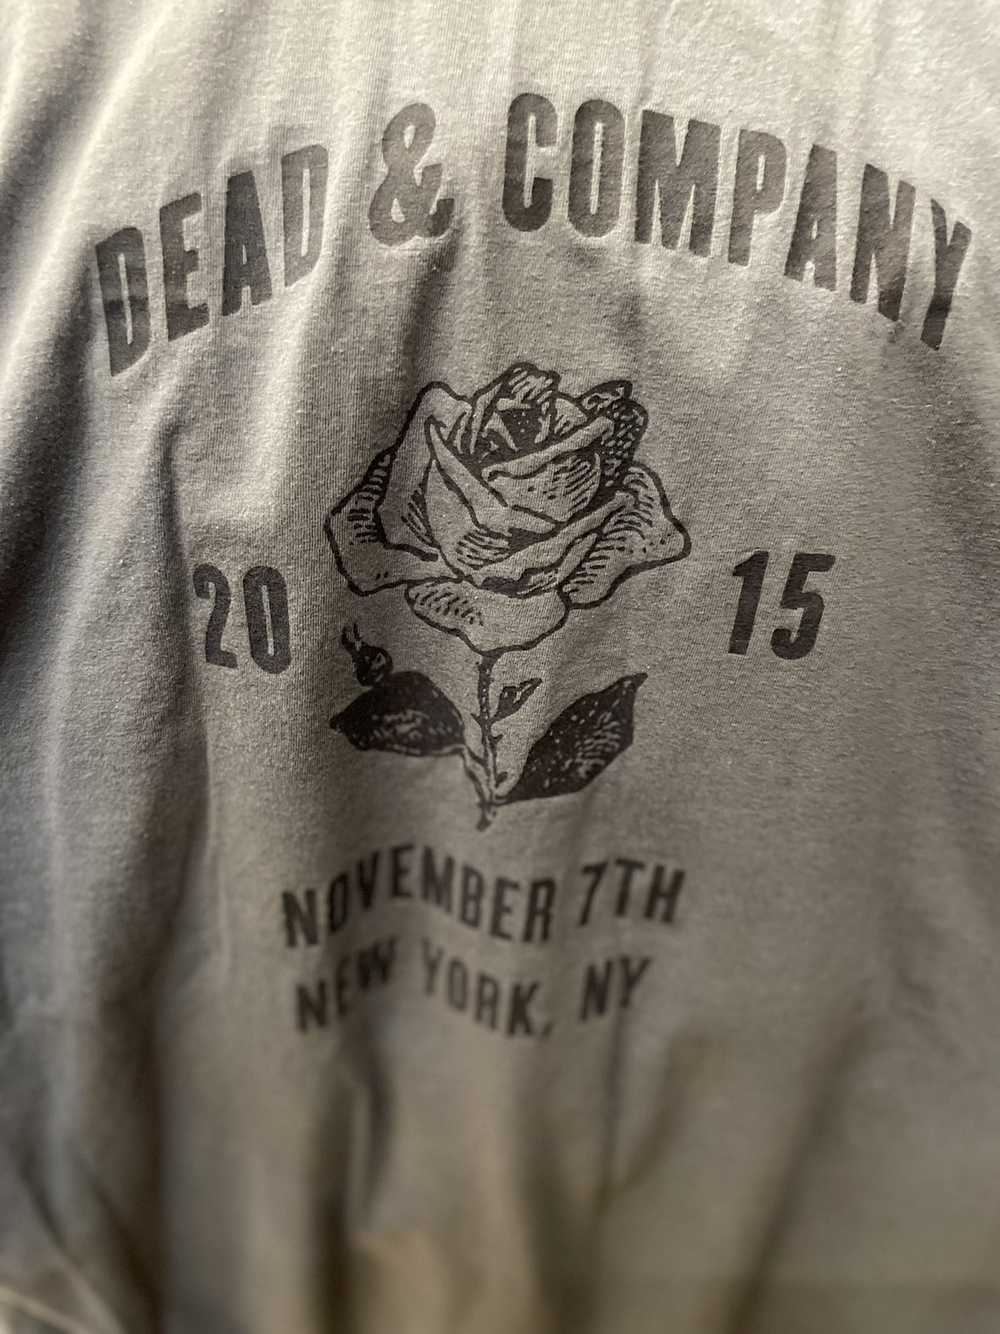 Band Tees Dead and Company 11.7.15 NYC - image 6